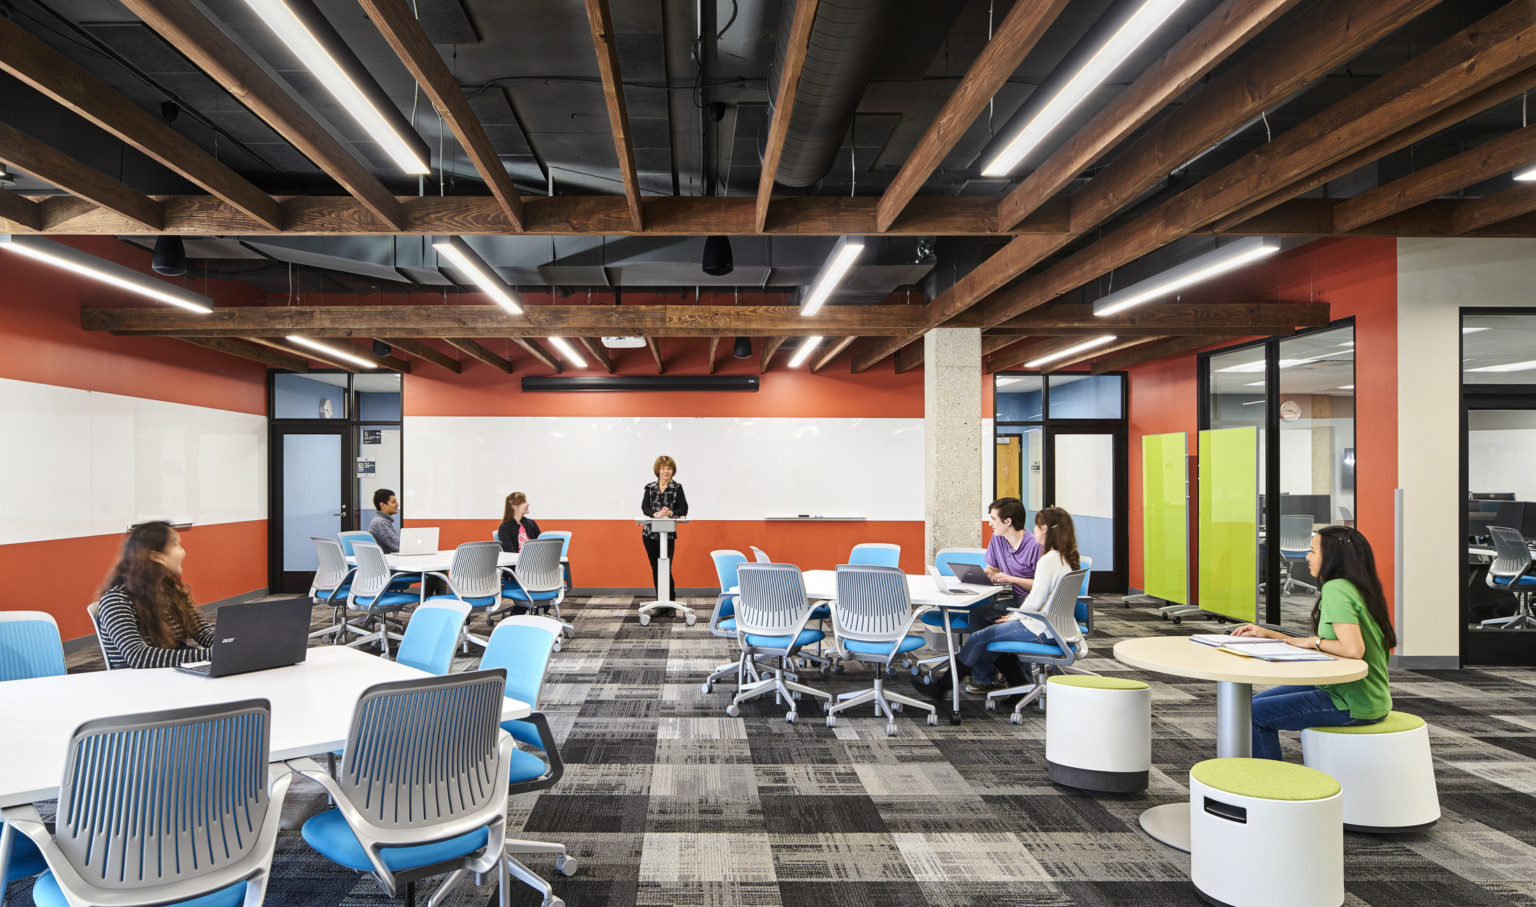 students learning in a room with flexible furniture and timber ceilings. Orange and white striped wall, front and left